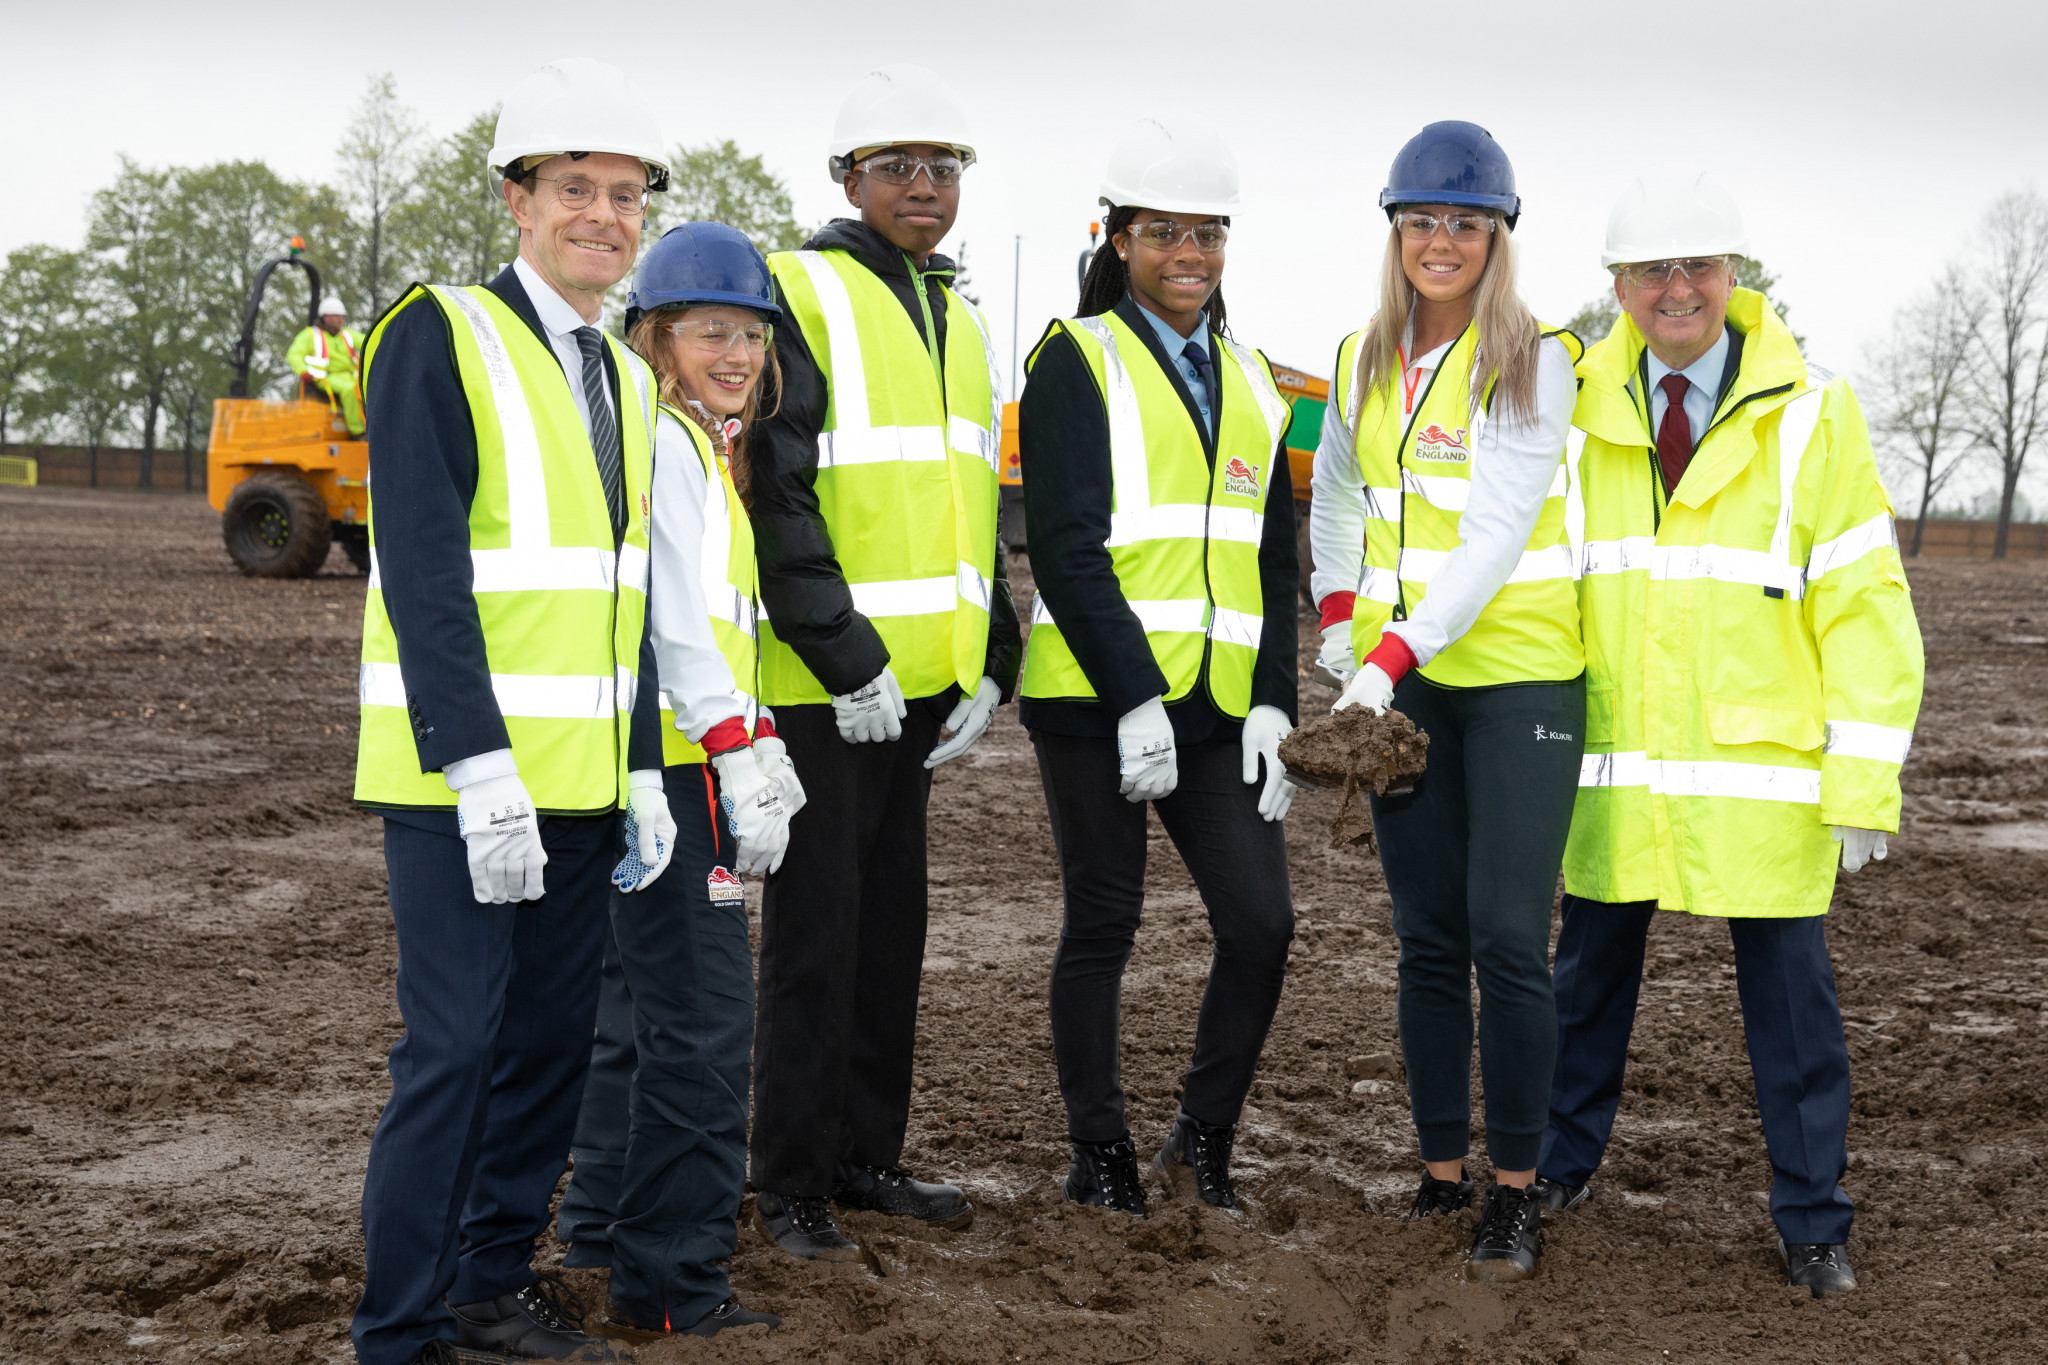 The Birmingham 2022 ground-breaking ceremony was attended by Birmingham City Council Leader Ian Ward, Mayor of the West Midlands Andy Street, Team England athletes Katrina Hart and Katie Stainton and local schoolchildren ©Birmingham 2022